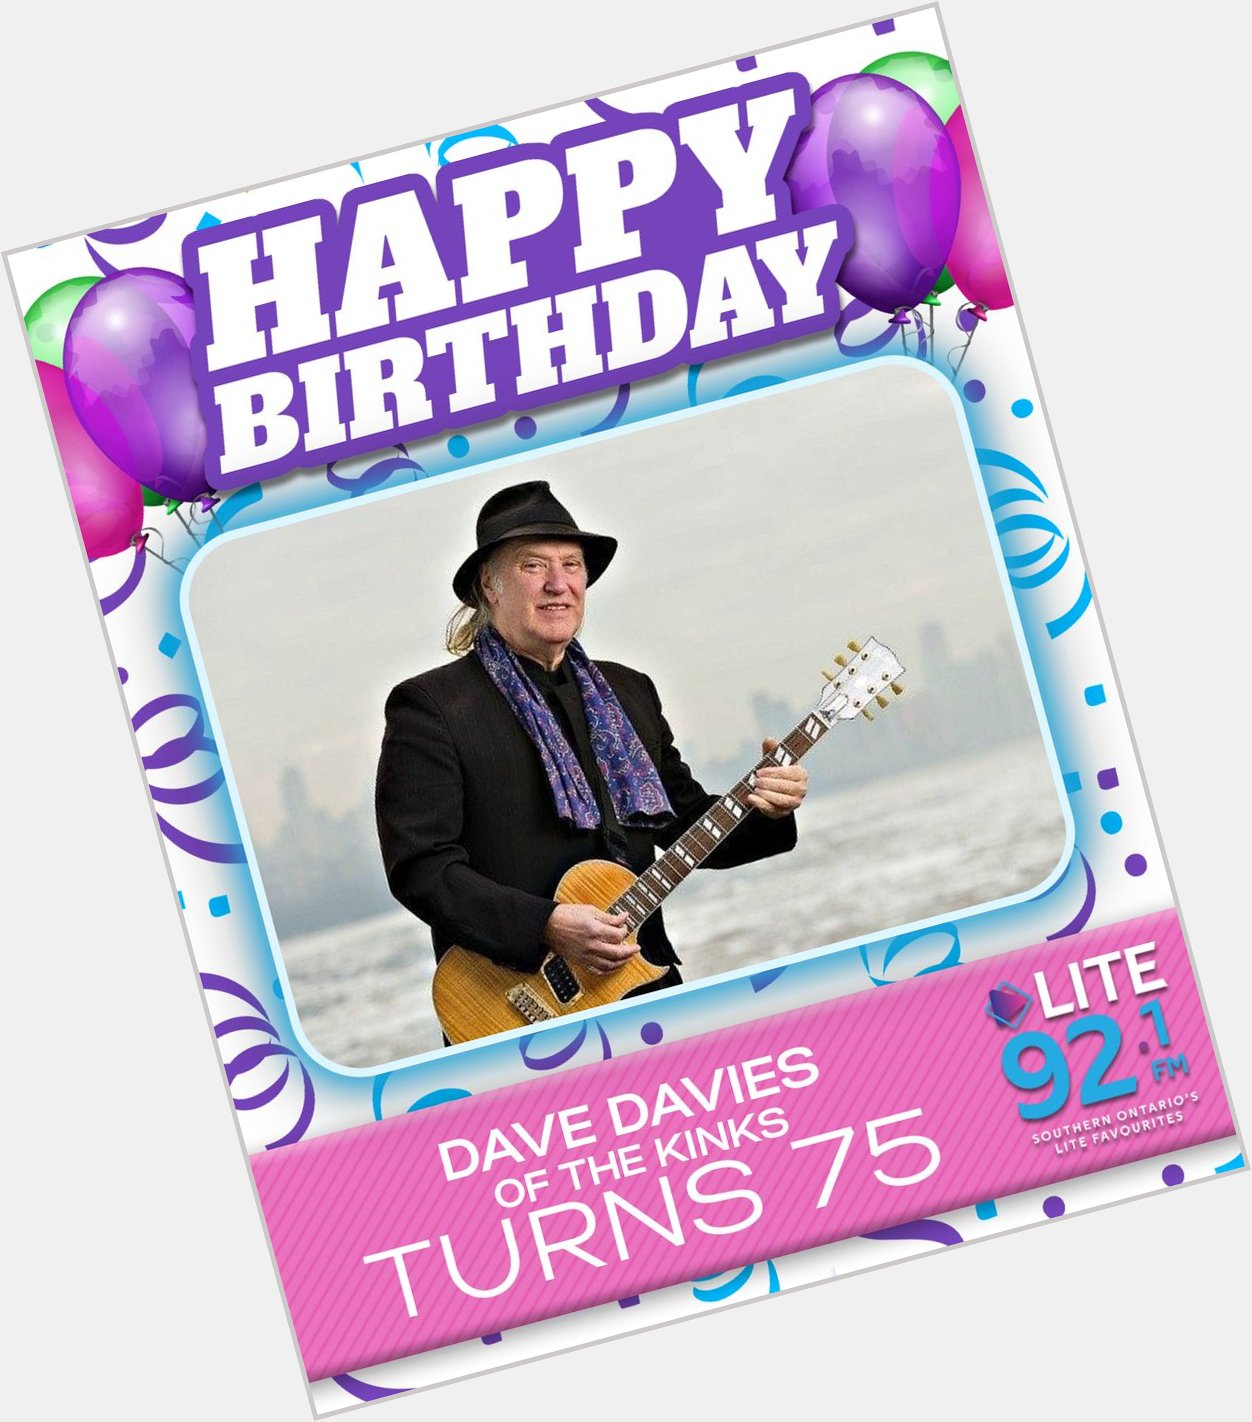 A big happy birthday shoutout goes to Dave Davies of The Kinks, who turns 75 today! 